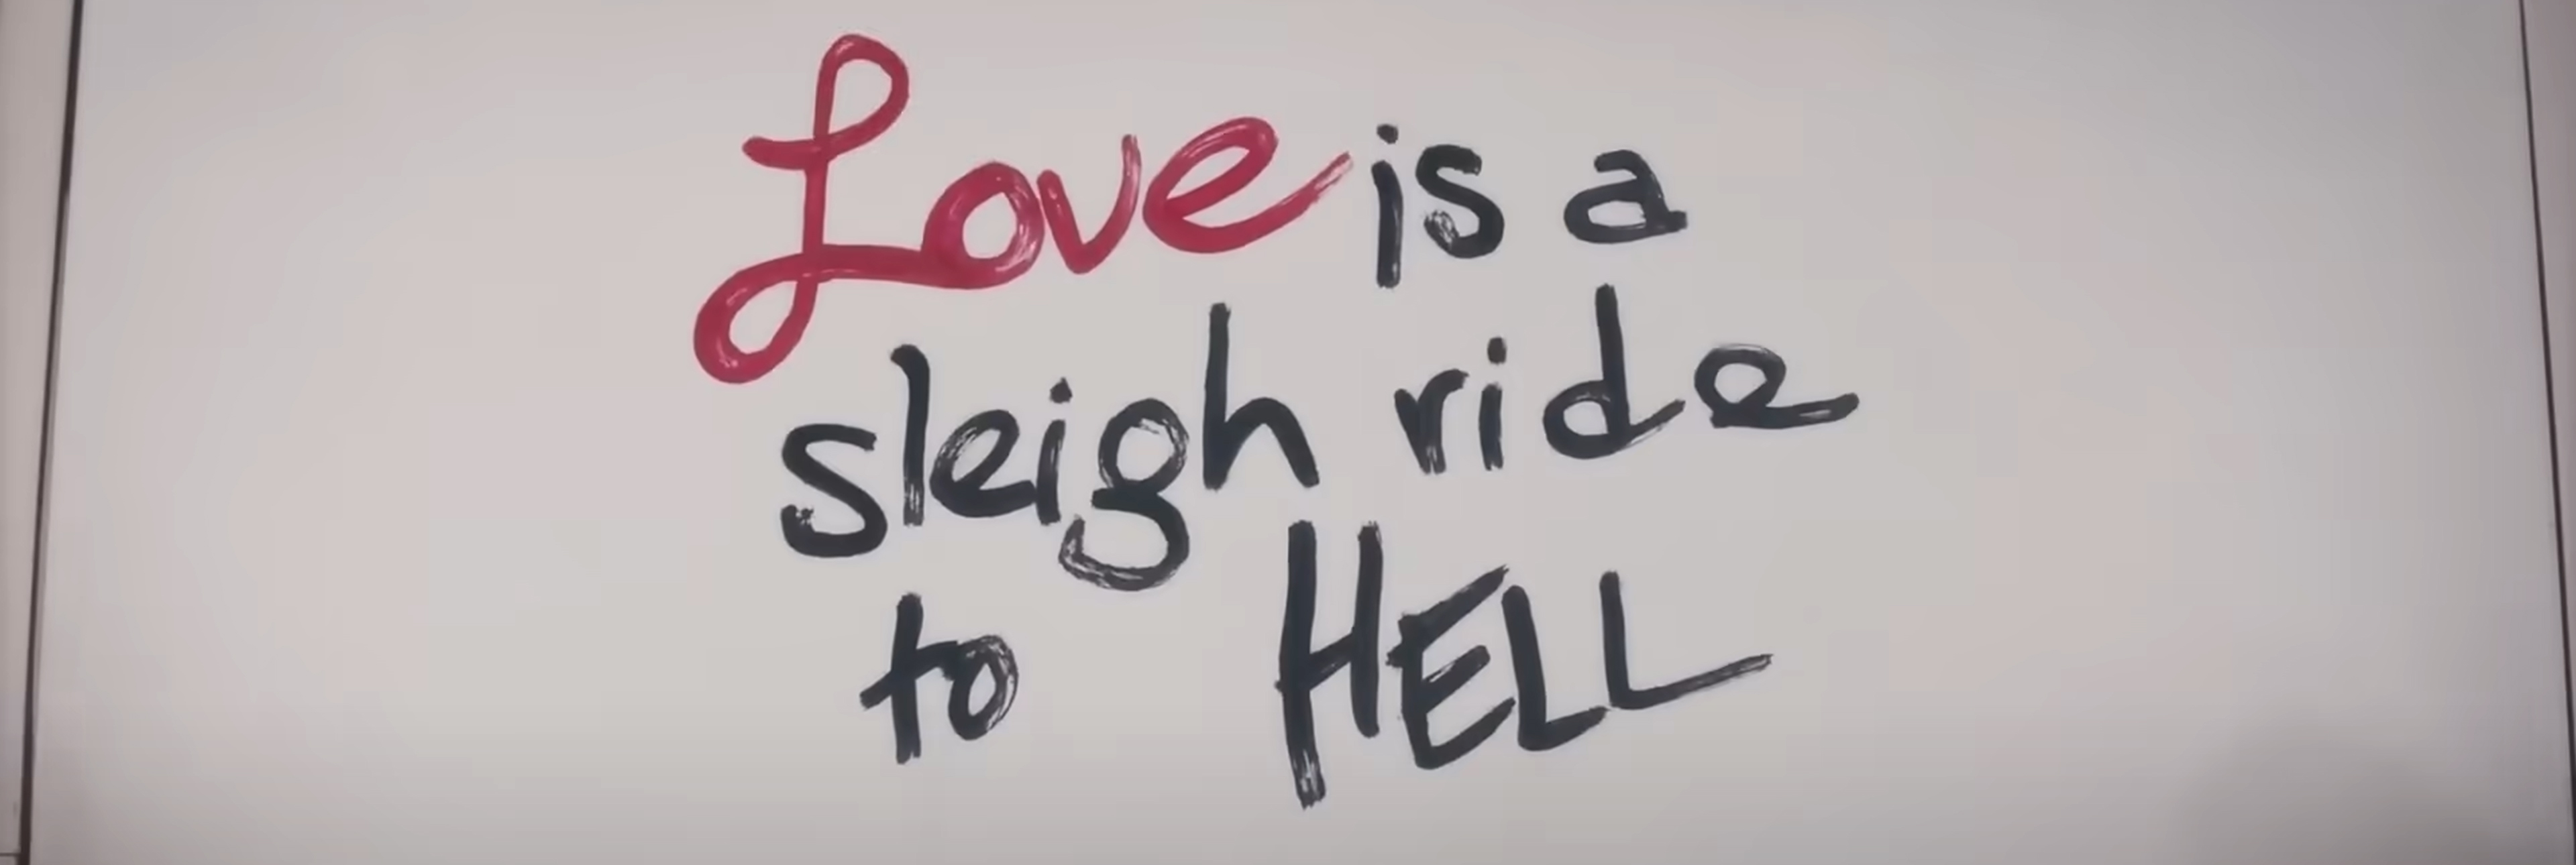 Love is a sleigh ride to HELL.